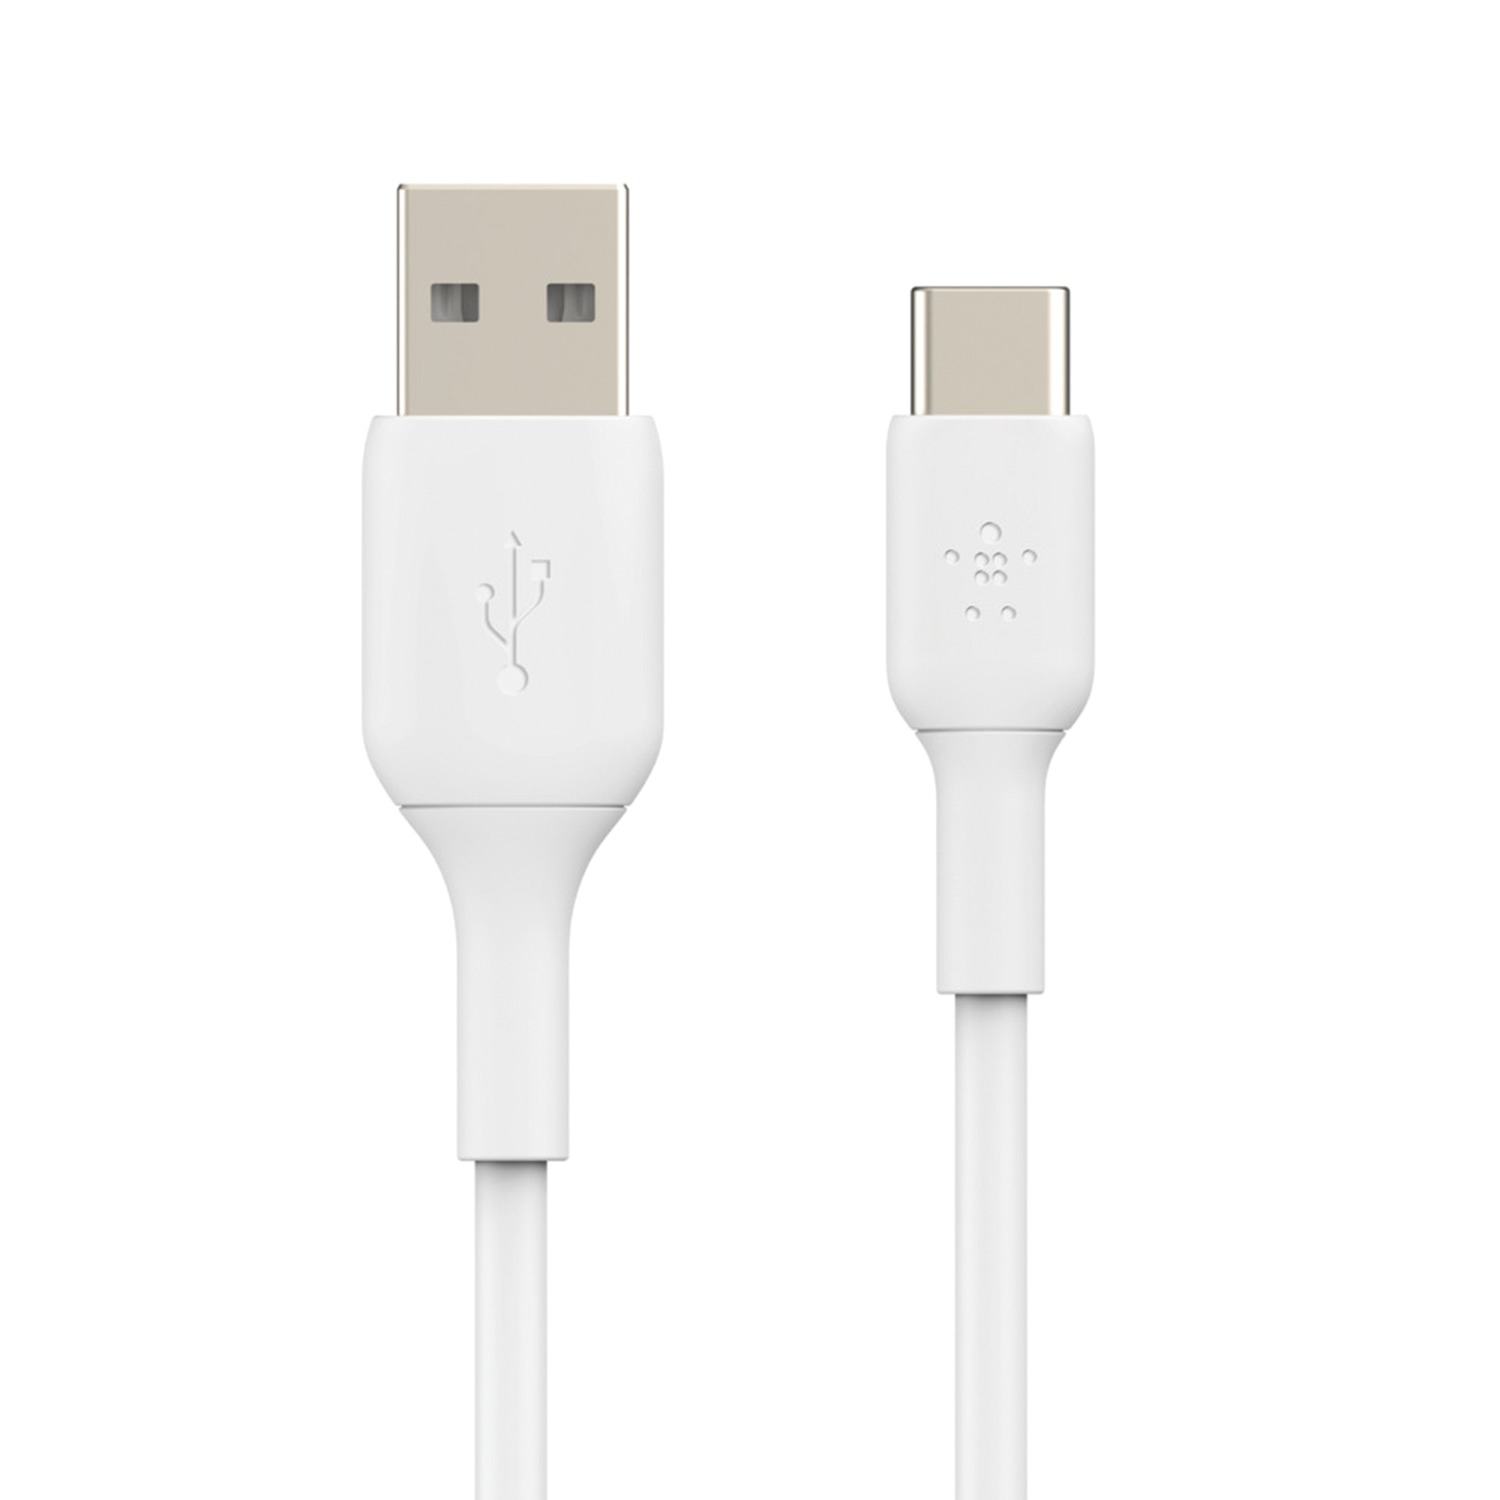 Belkin BoostCharge USB-C Cable (1M/3.3ft), USB-C to USB-A Cable, USB Type-C Cable for iPhone 15 Series, Samsung Galaxy S24, S24+, Note20, Pixel 7, Pixel 8, iPad Pro, Nintendo Switch, and More - White - image 5 of 6